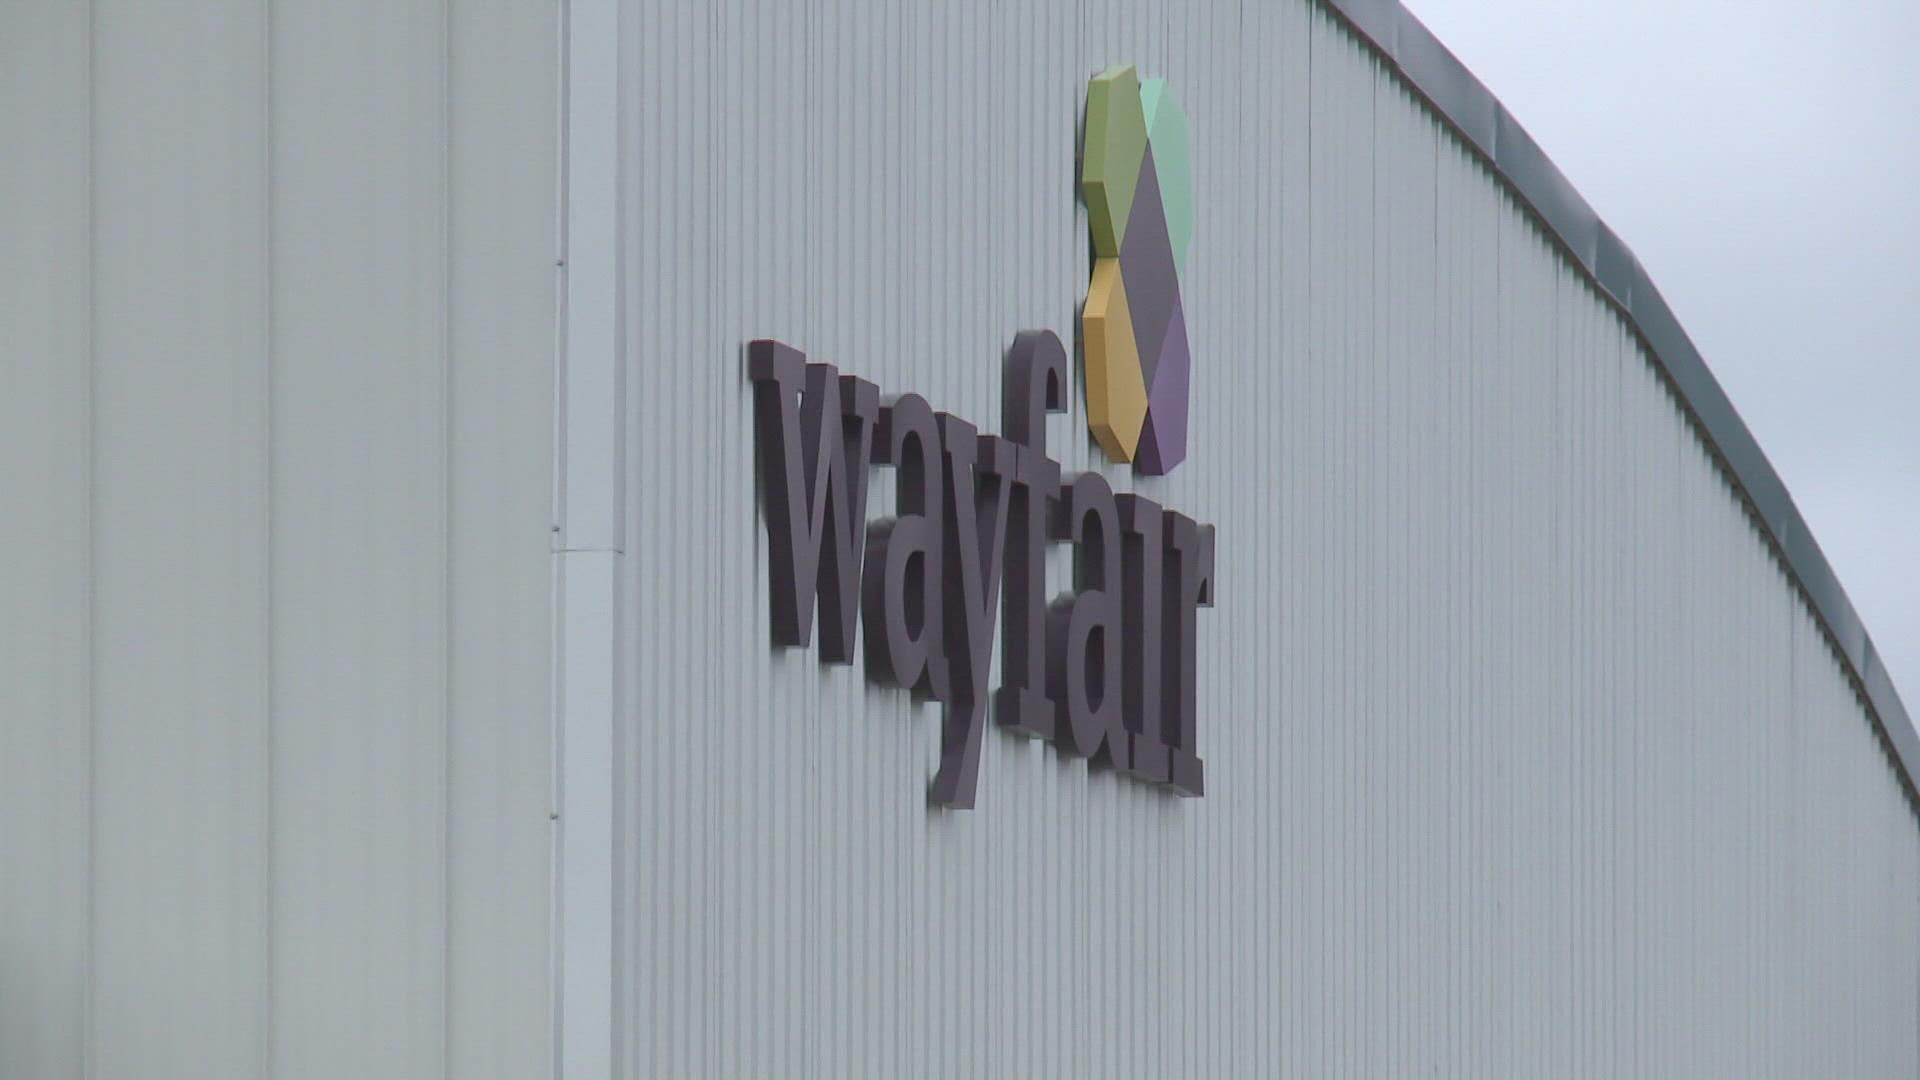 Wayfair said that the roughly 150 Brunswick employees working at the Brunswick facility are now working with the company's Virtual Customer Service Team.